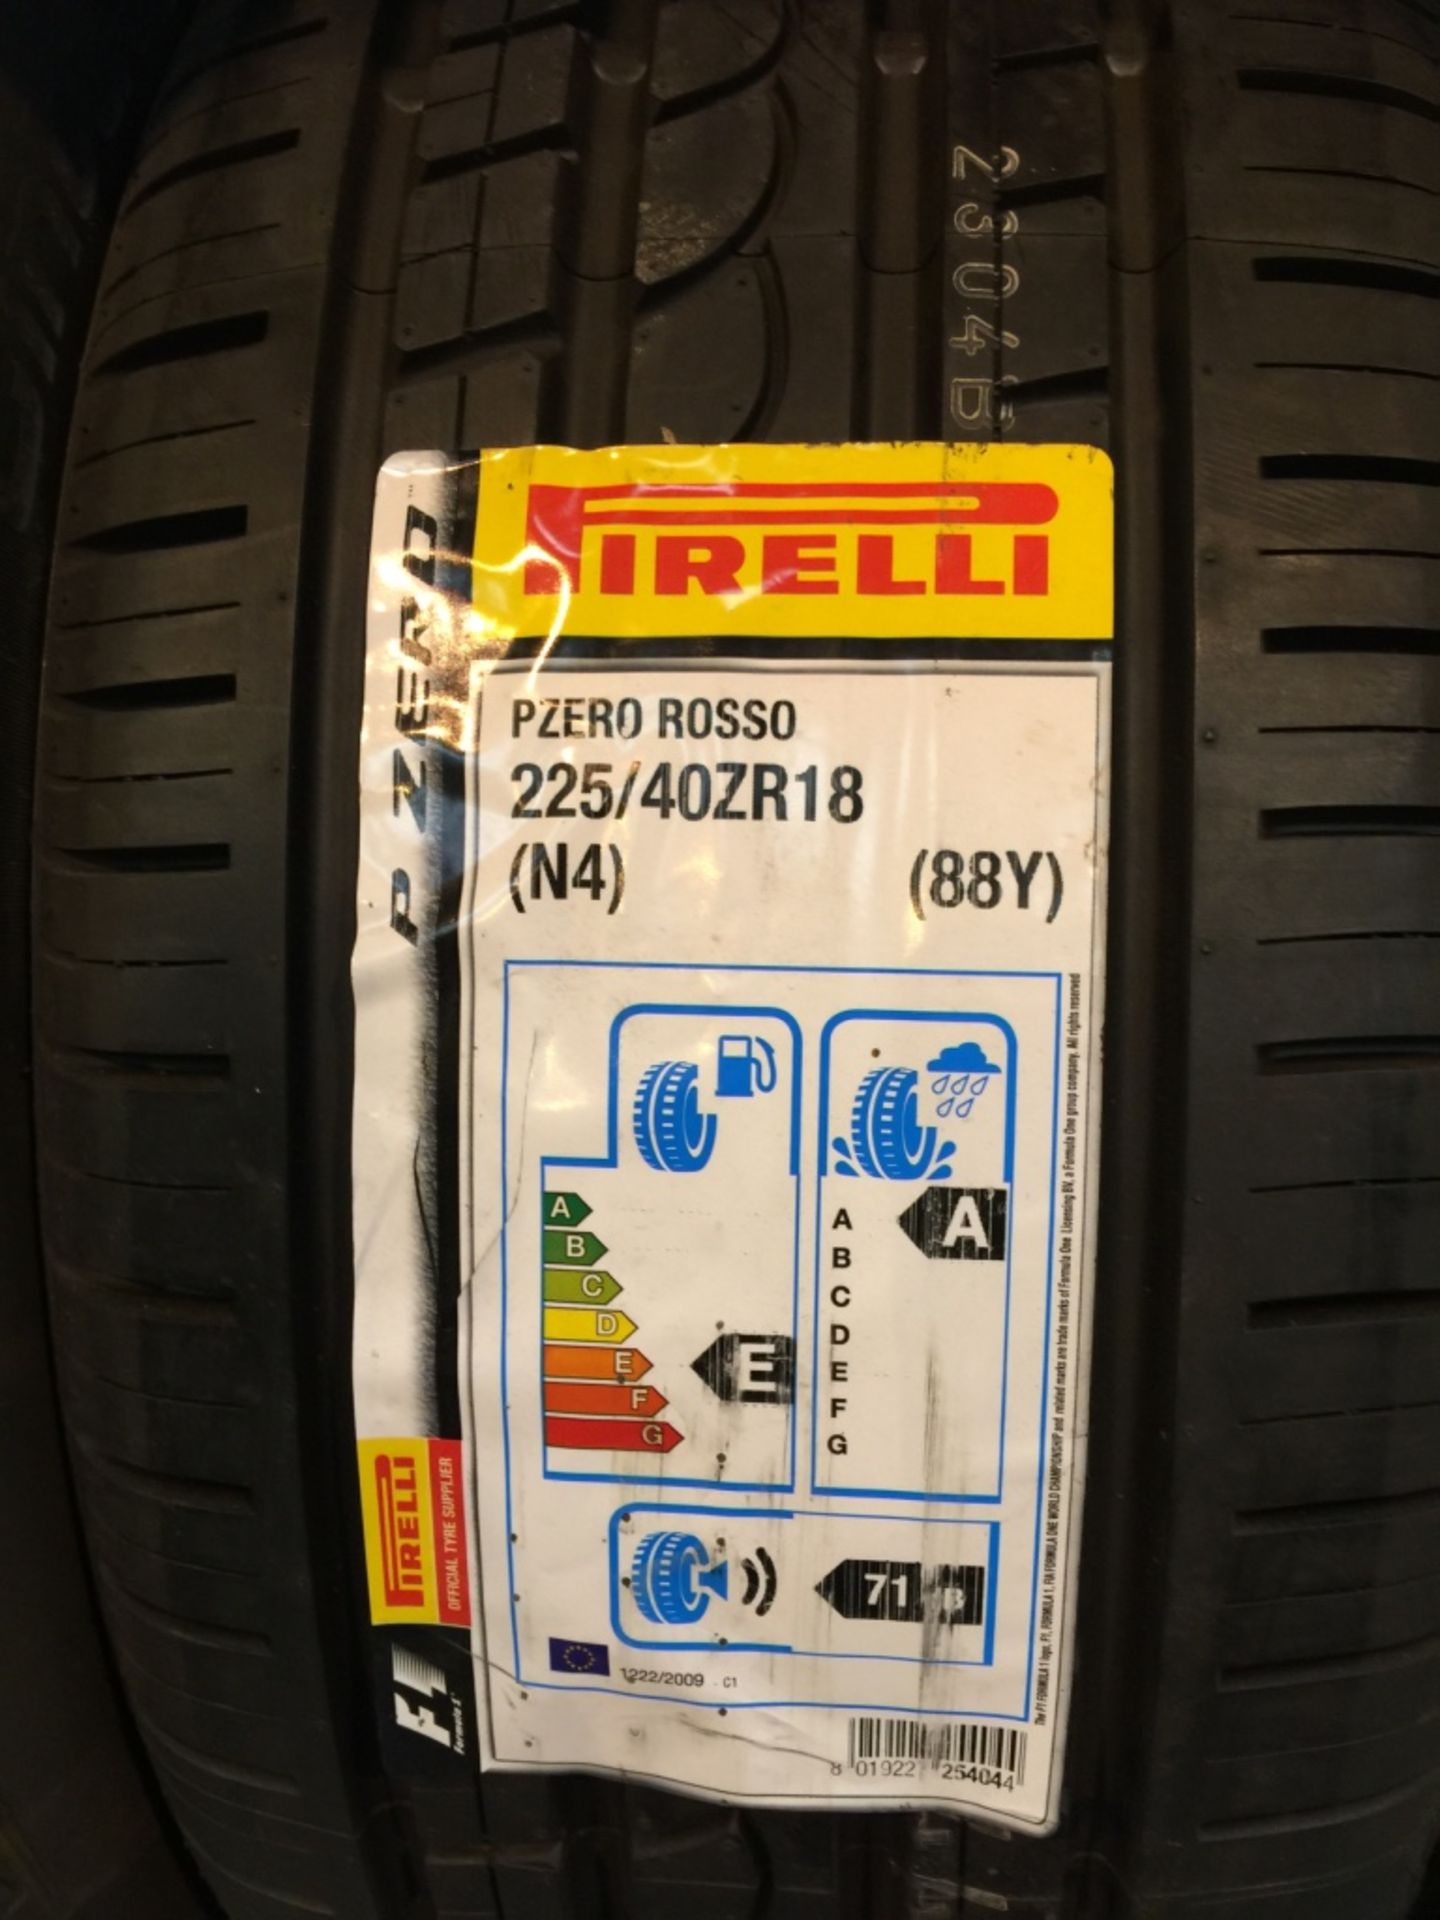 54: Pirelli Tyres Car & 4X4 - Many Large Sizes to include 18,19,21" Please see further Pictures ( - Image 30 of 55